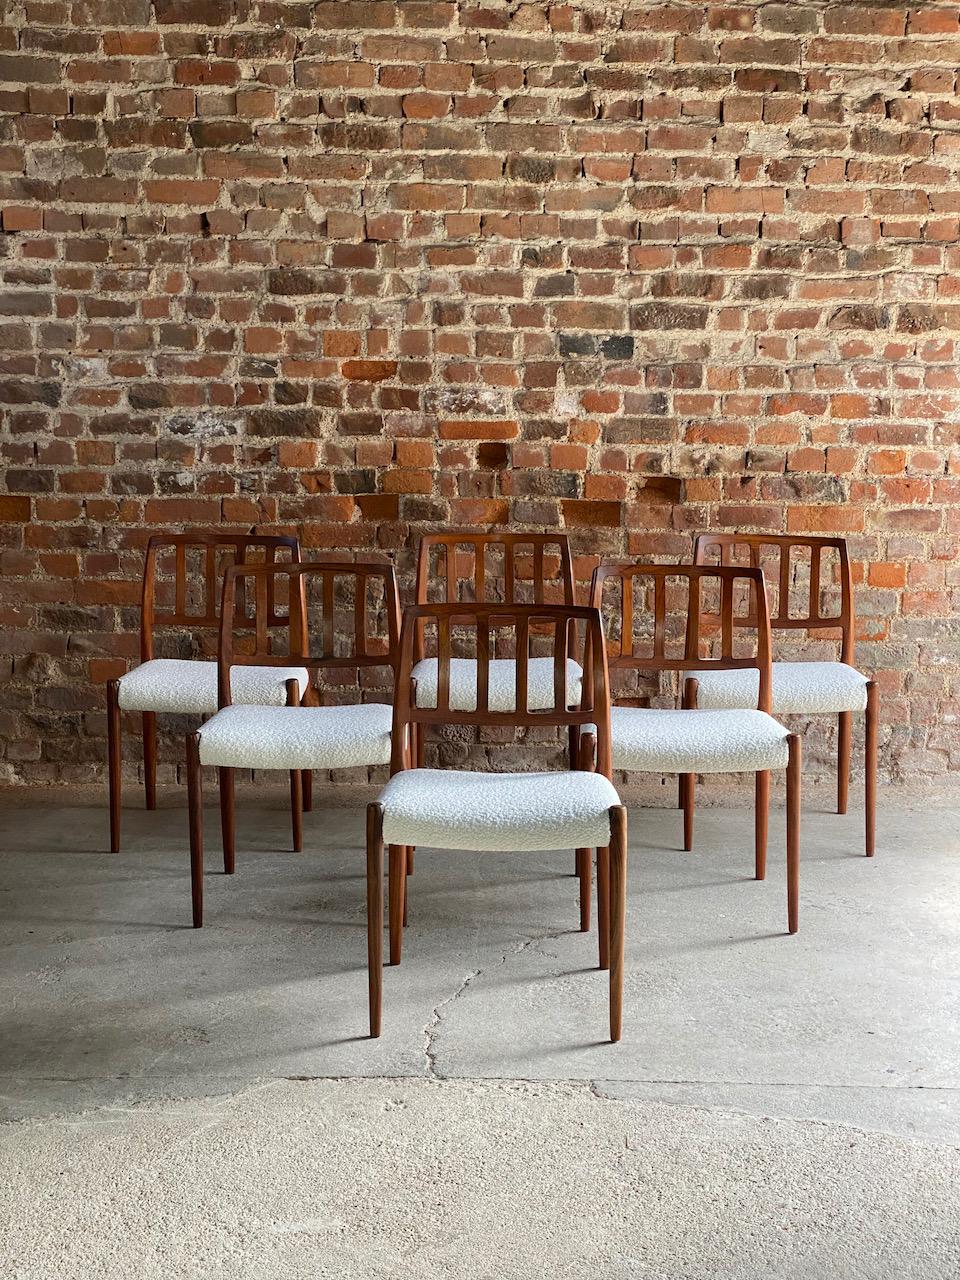 Moller model 83 rosewood dining chairs set of six in Bouclé Denmark 1970

??magnificent set of Niels Otto Møller model 83 rosewood dining chairs manufactured by J.L. Møllers Møbelfabrik Denmark, circa 1970, the set of six solid Rosewood frames